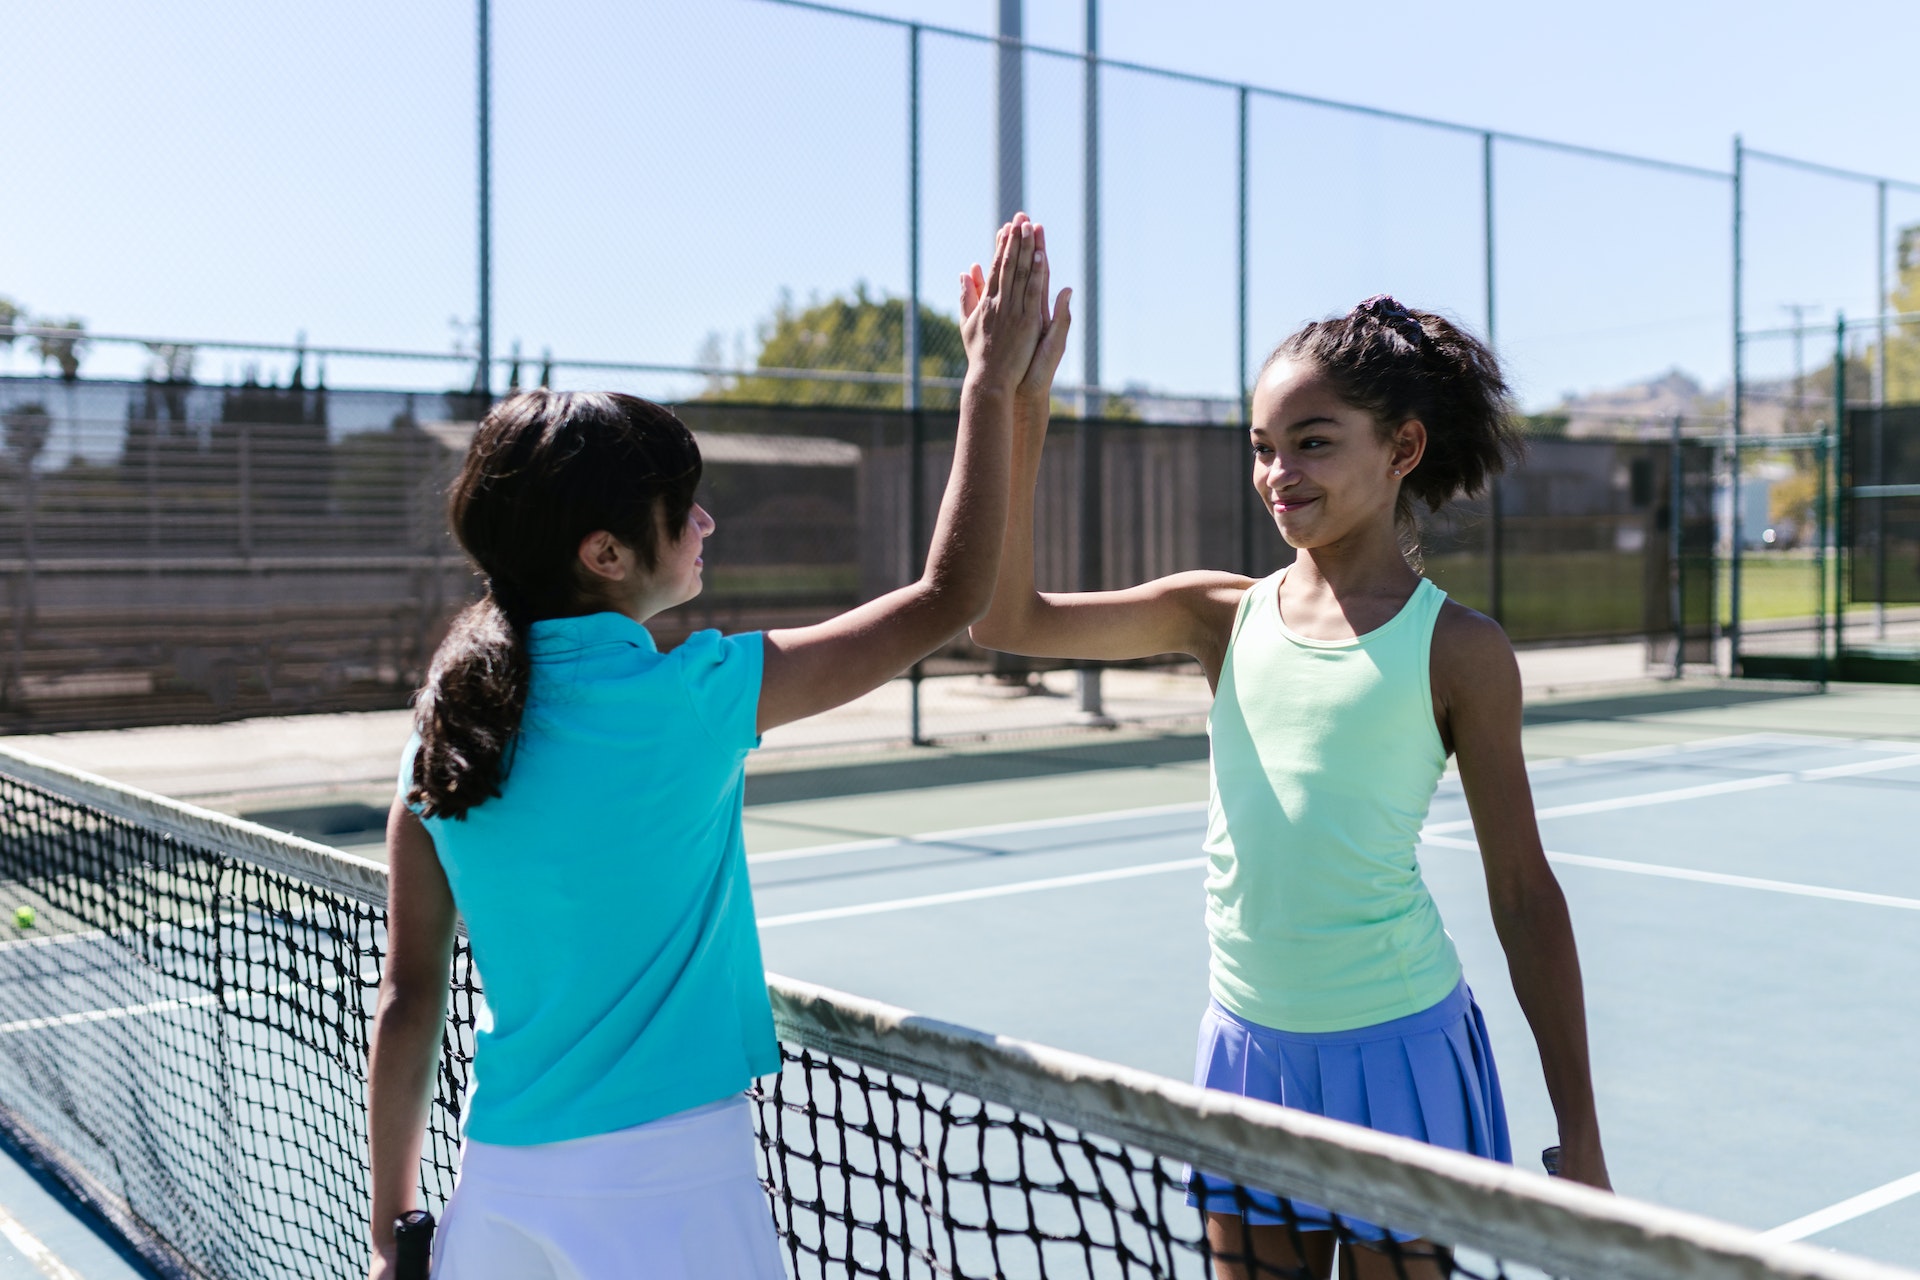 Two young girls giving each other a high-five across a tennis net